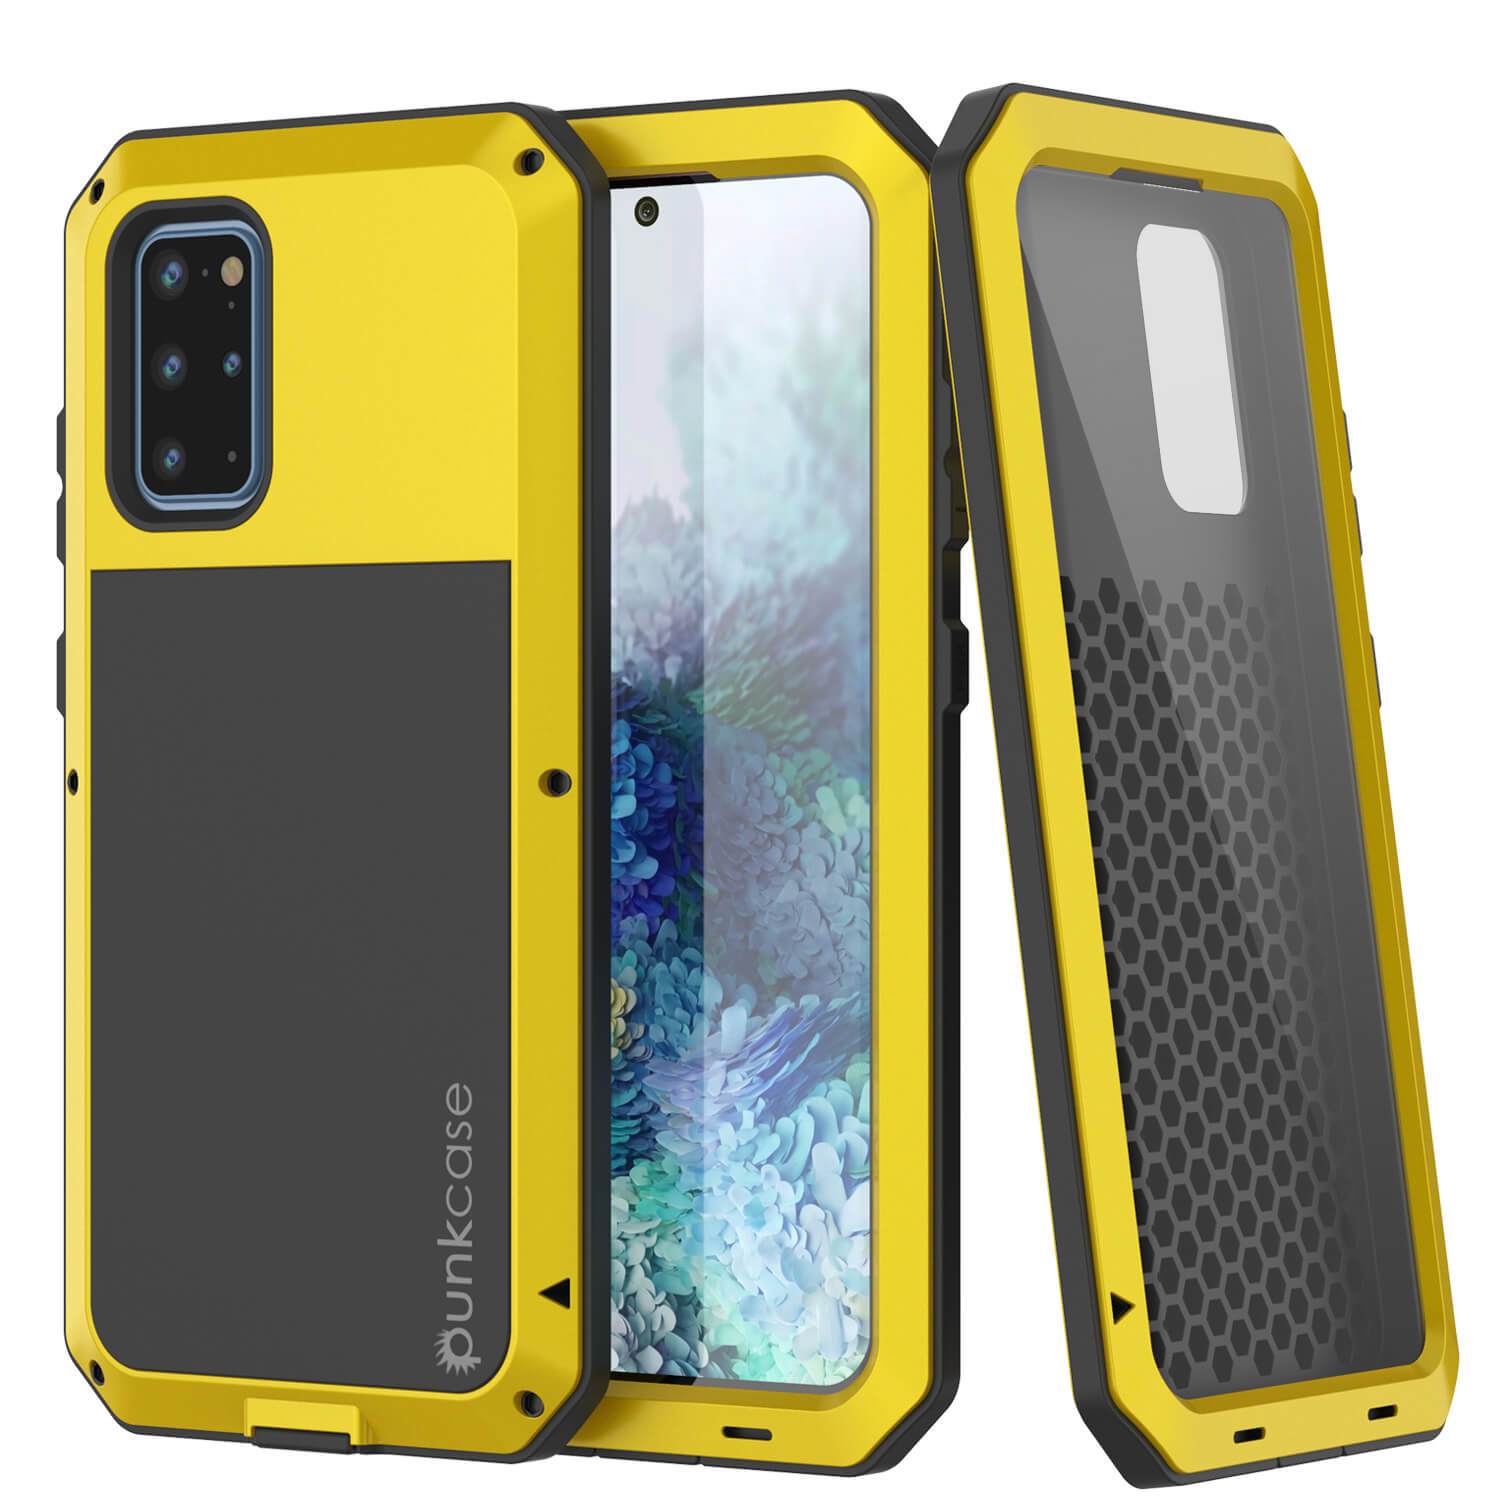 Galaxy s20+ Plus Metal Case, Heavy Duty Military Grade Rugged Armor Cover [Neon] (Color in image: Neon)